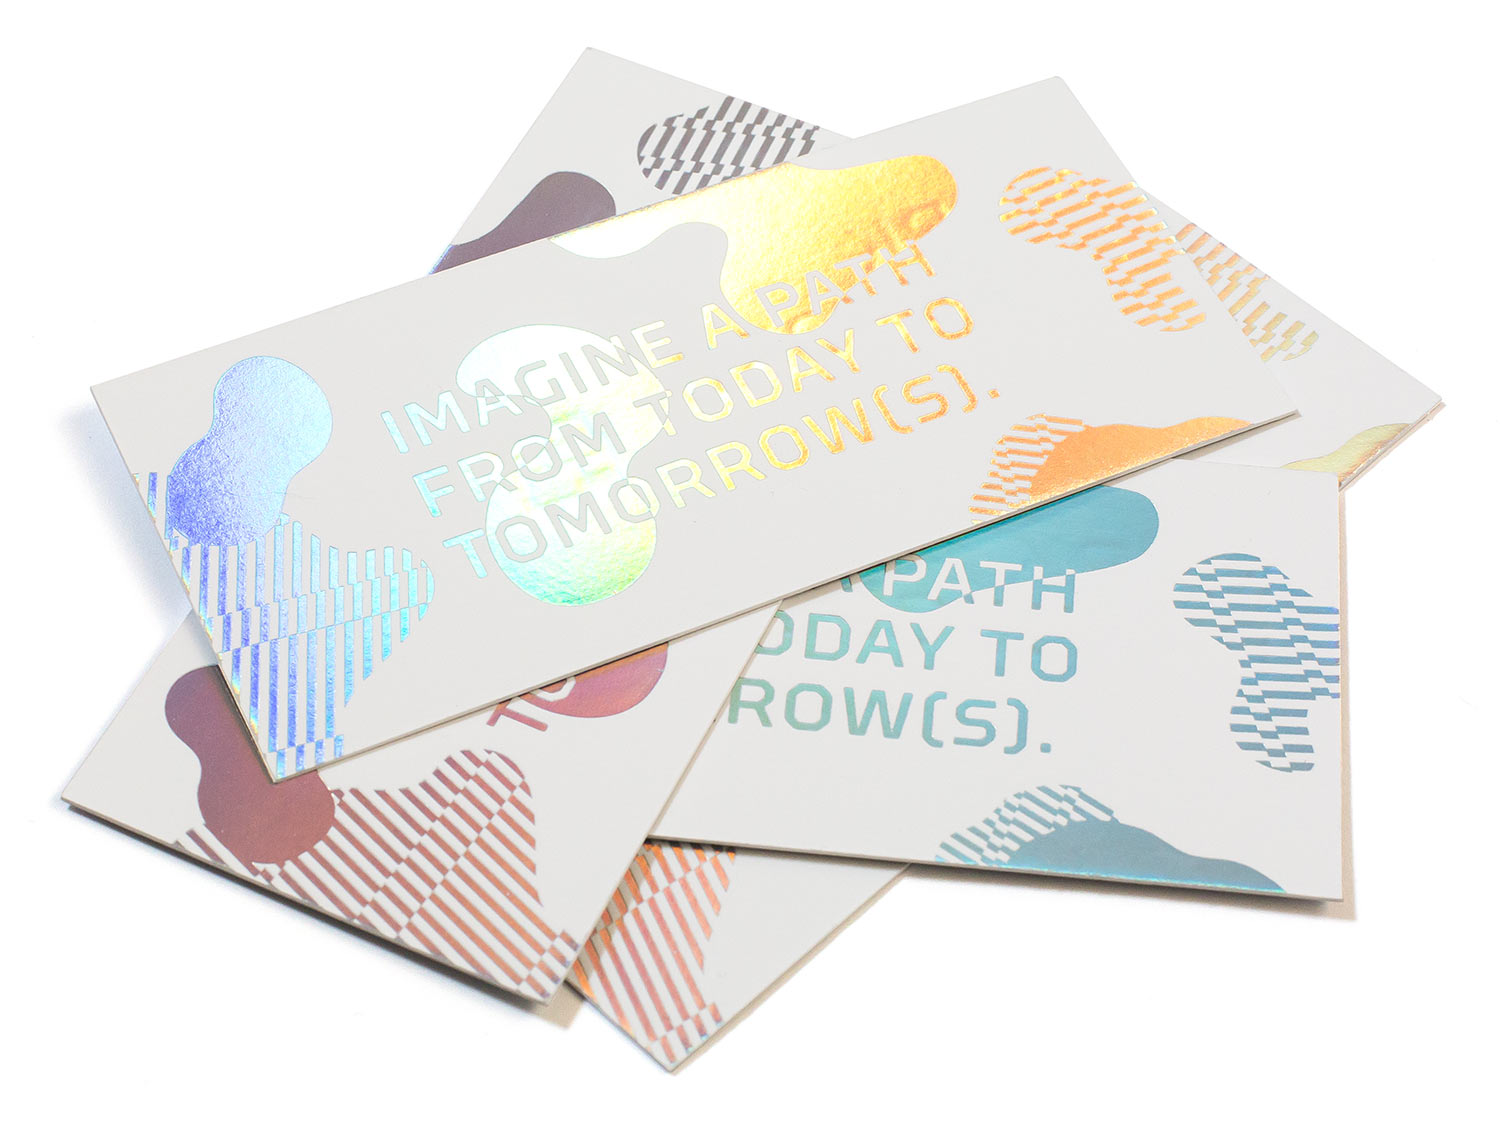 Iridescent foil stamped tickets for the Baltimore Museum of Art's Necessity of Tomorrow Lecture series featuring Mark Bradford, Ta'nehisi Coates, Mickalene Thomas, Boots Riley, and more